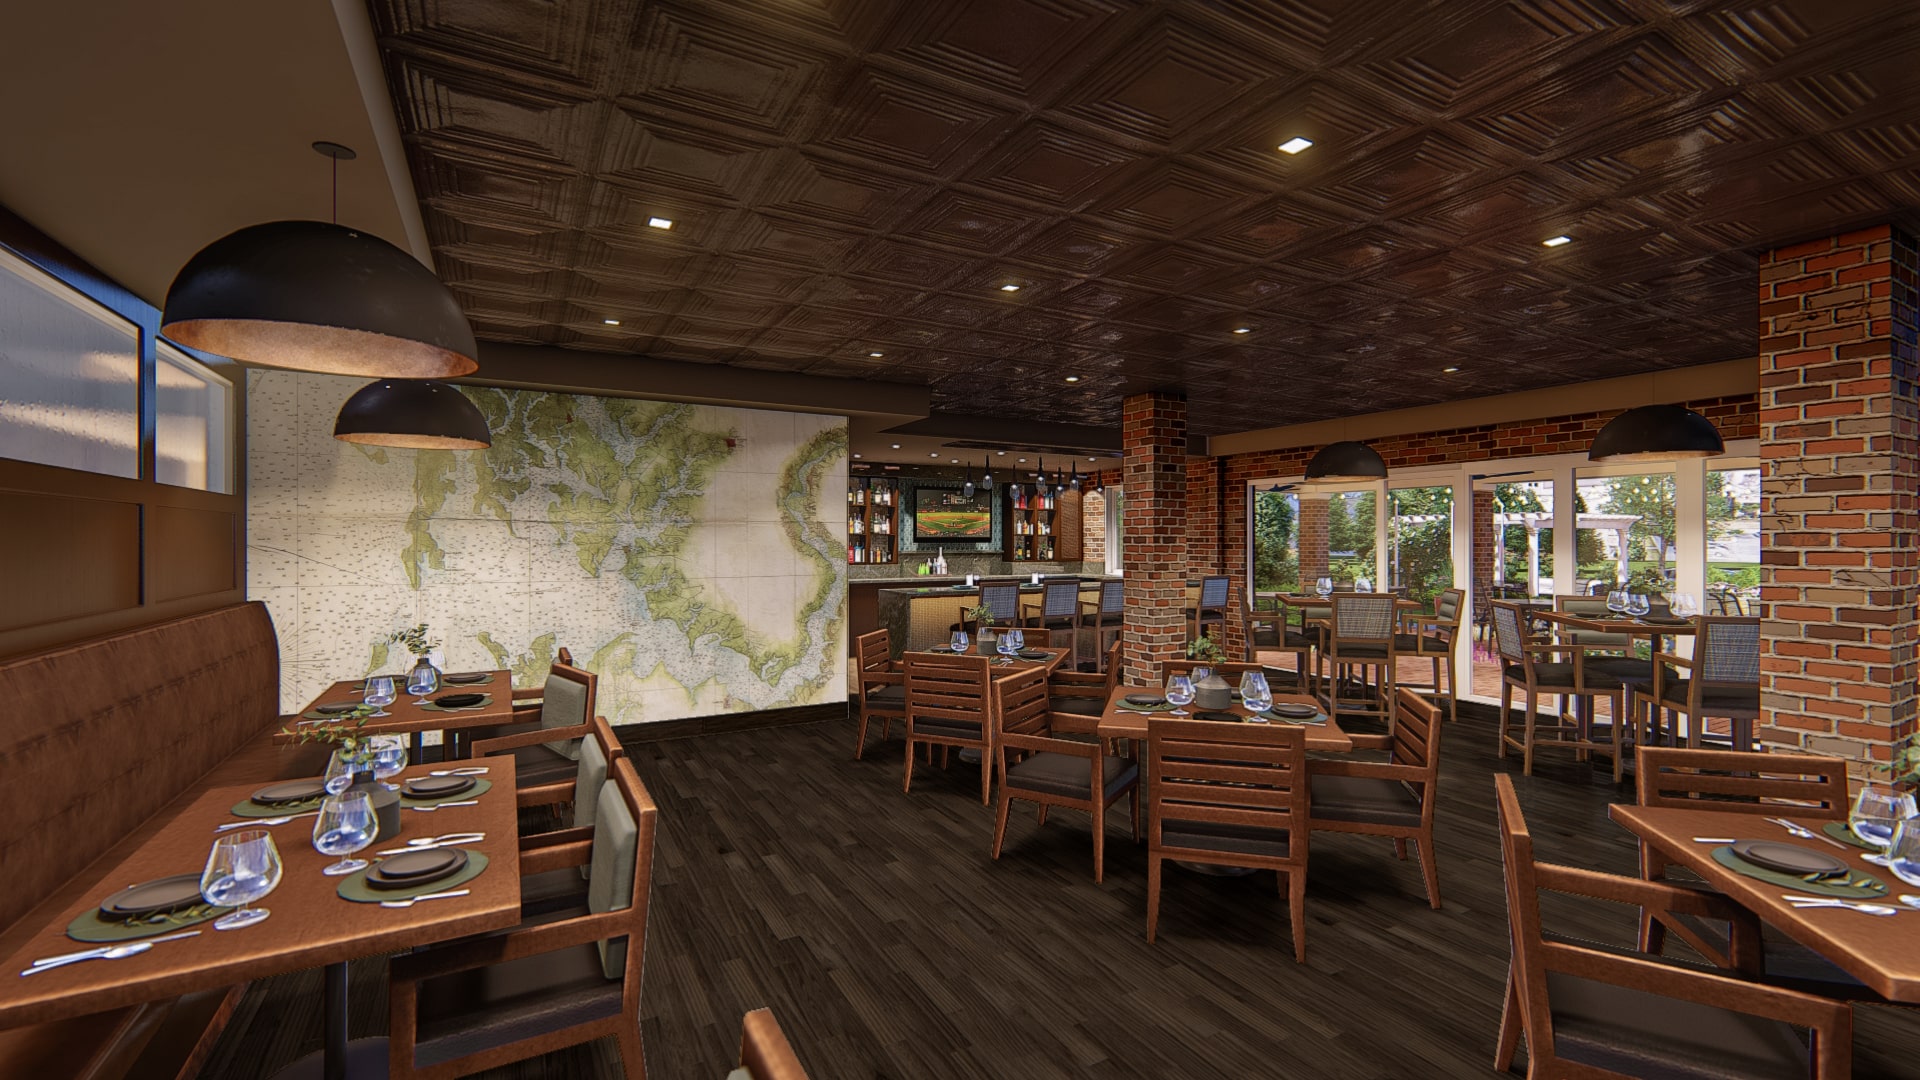 A rendering of LVMG's new Gastro Pub, which is part of the community's expansion.